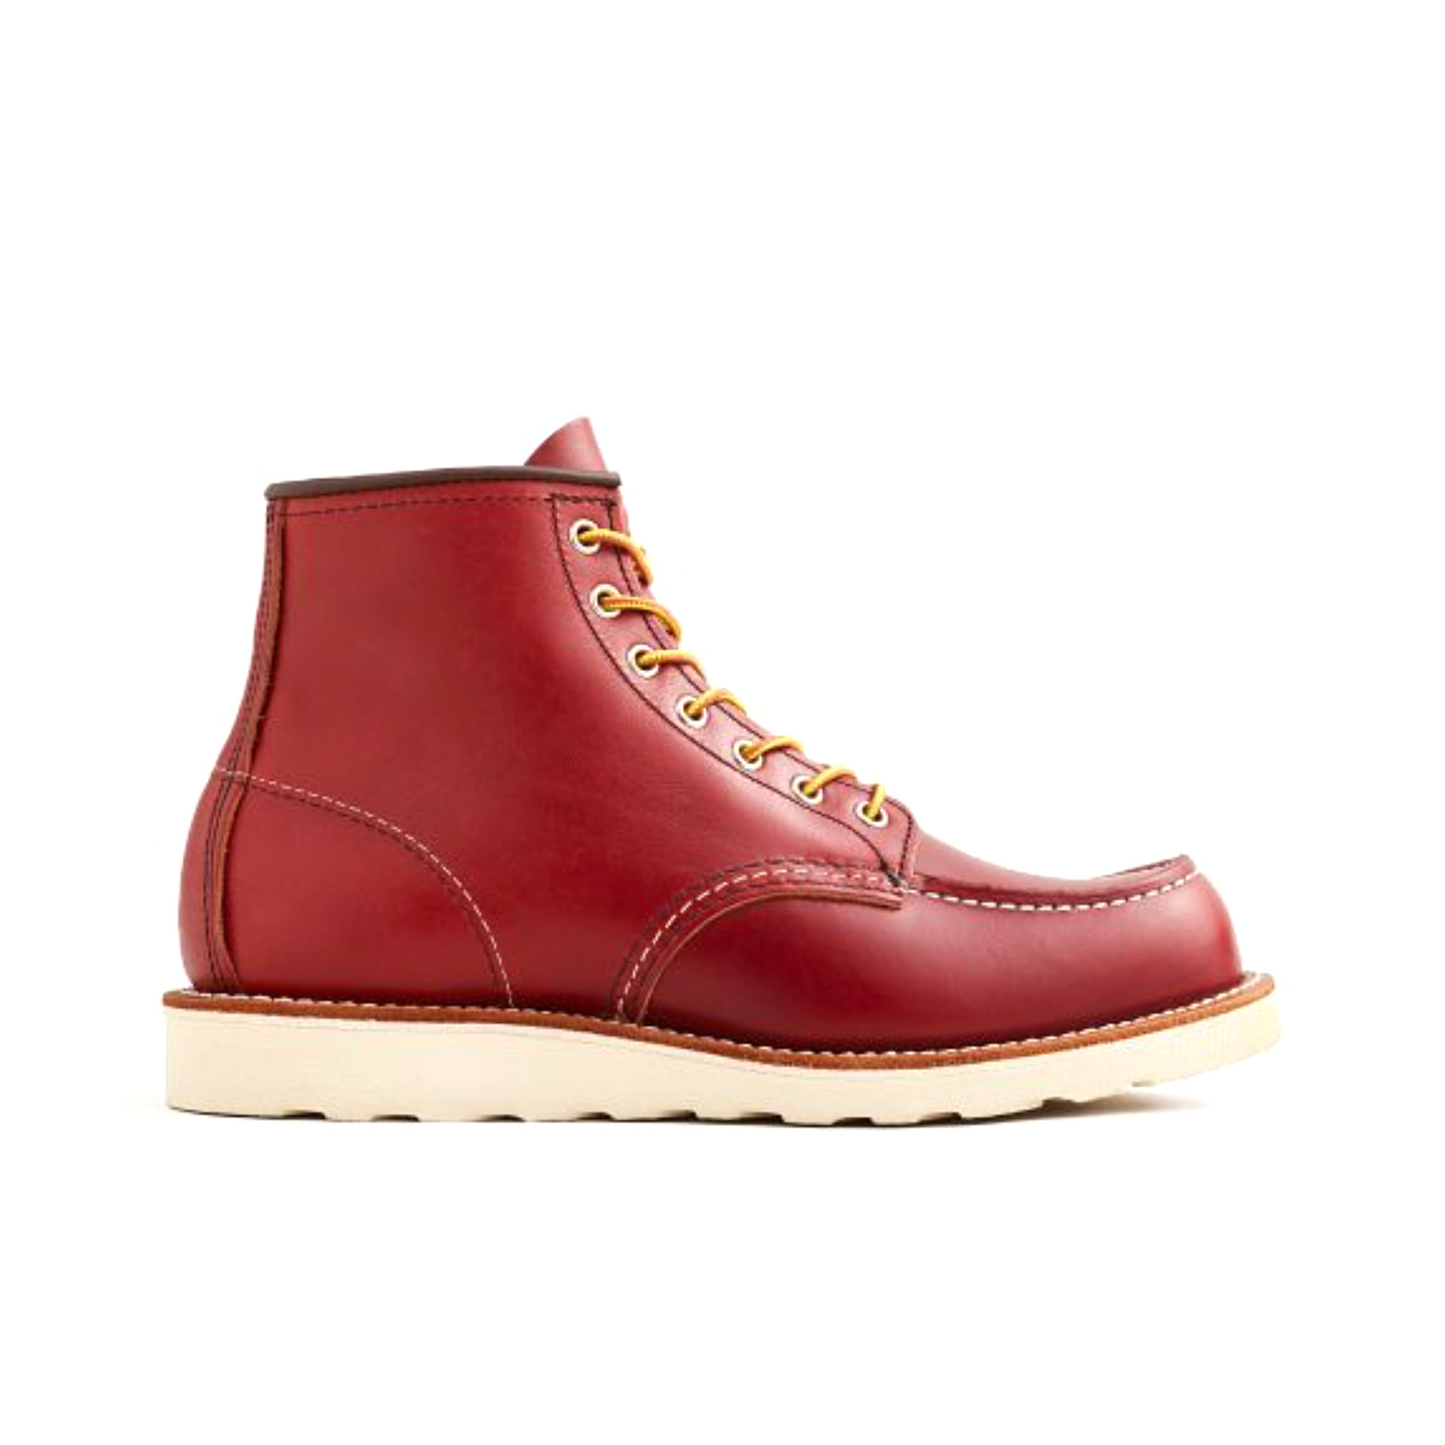 RED WING 8875 CLASSIC MOC BOOT MEN